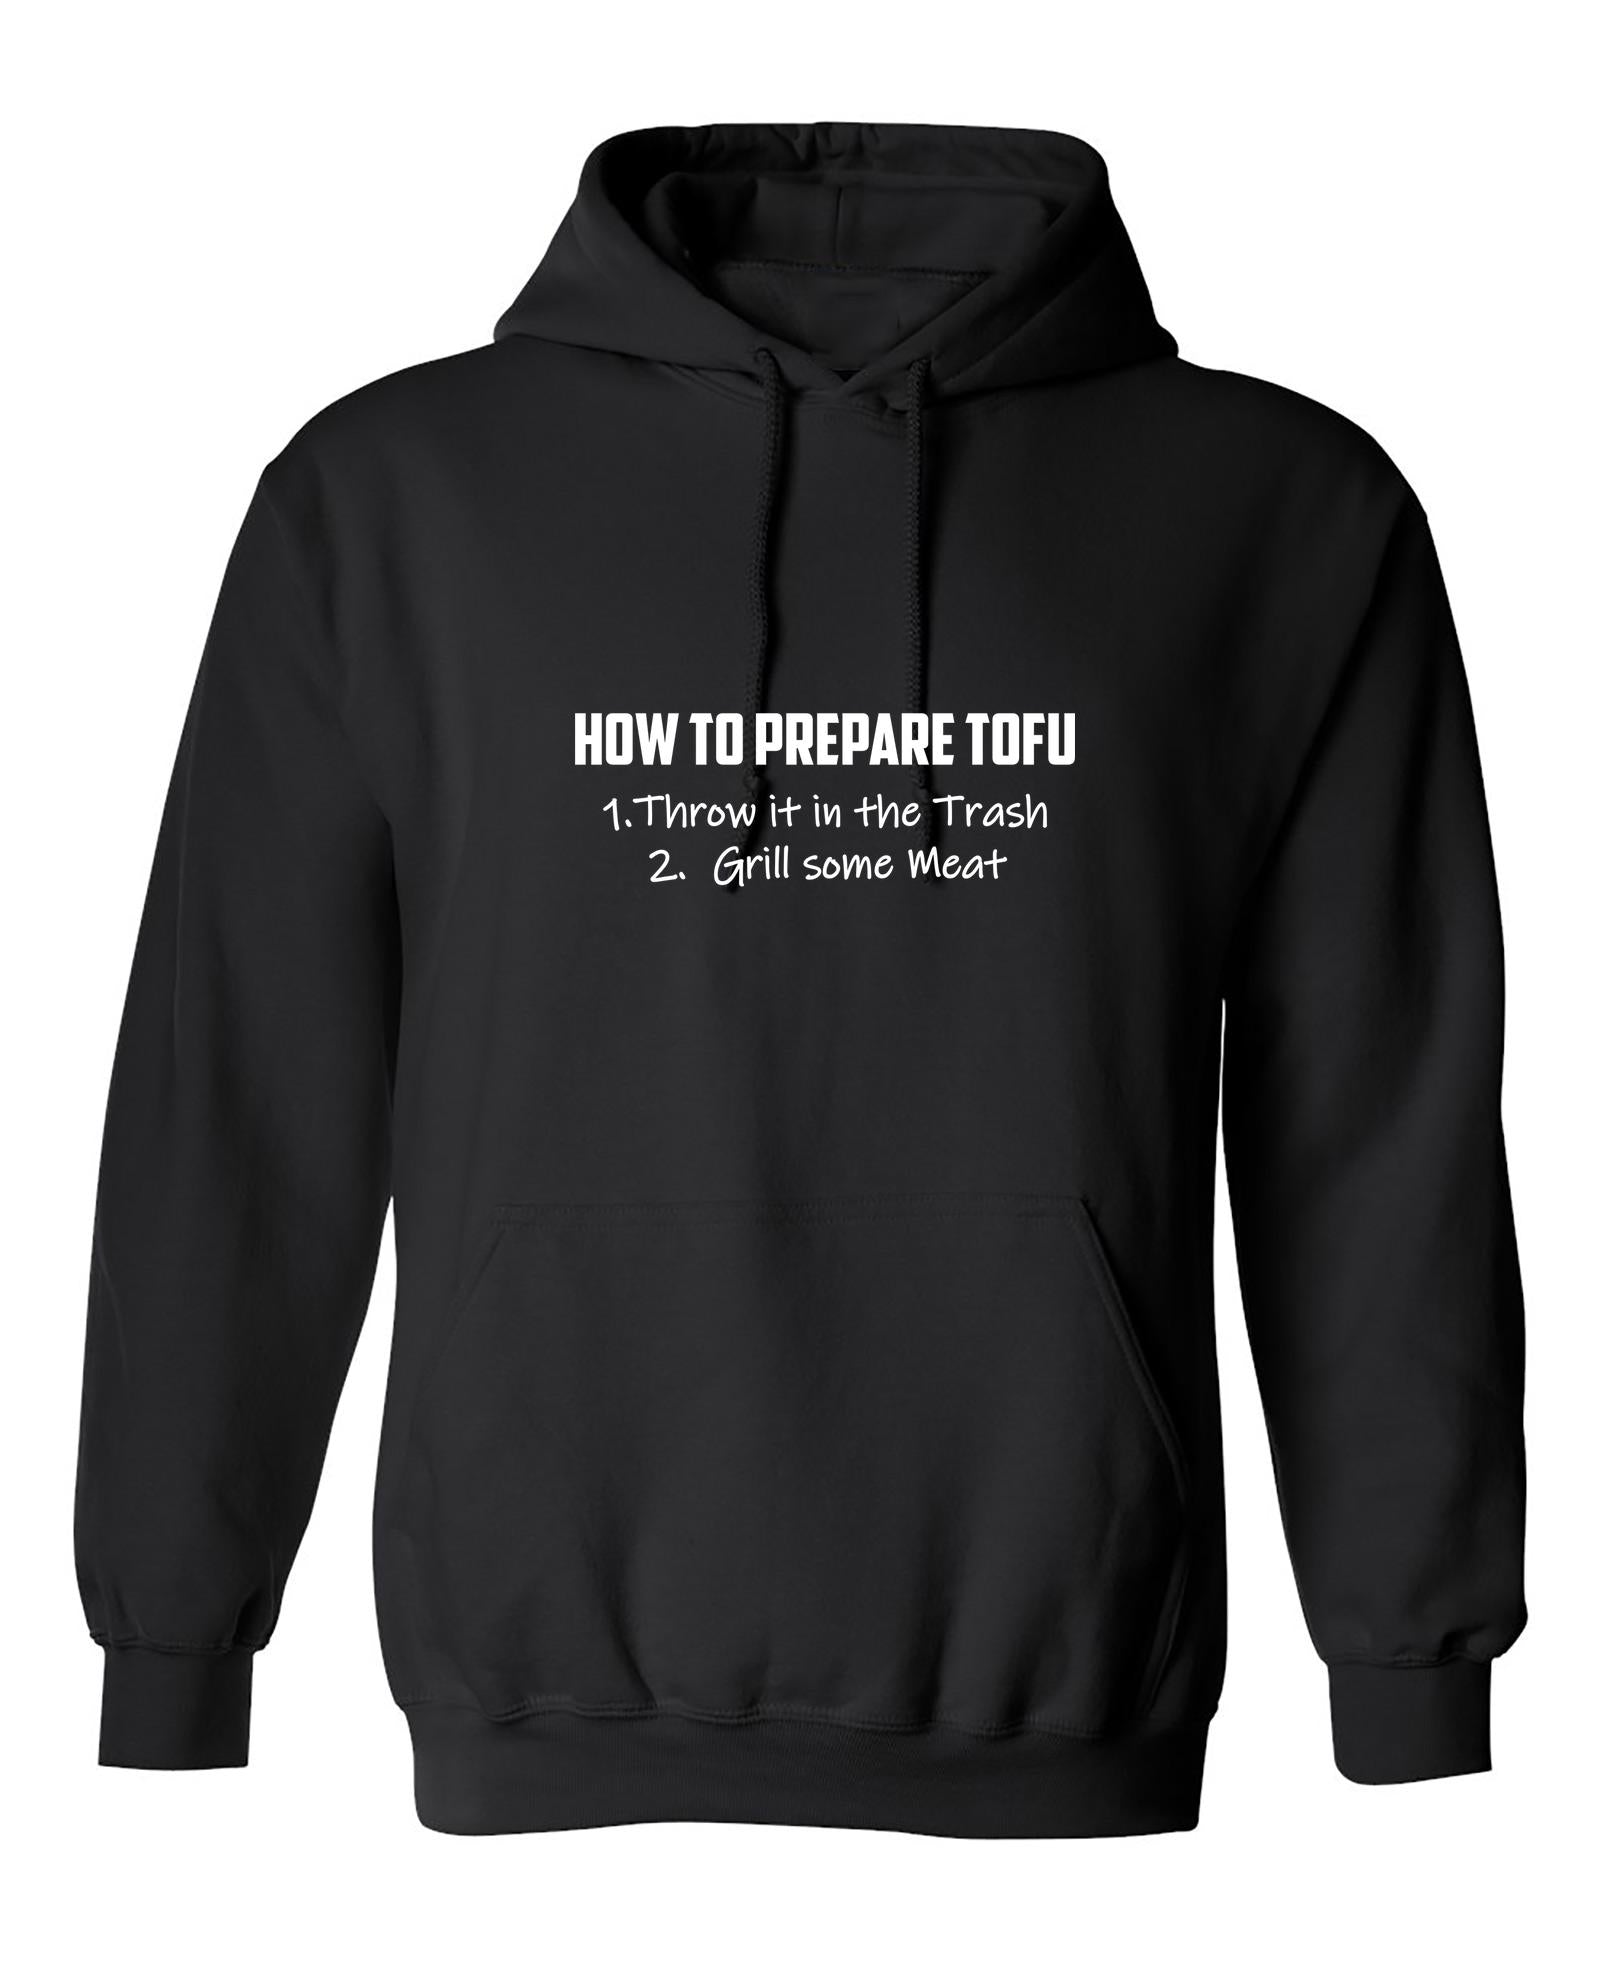 Funny T-Shirts design "How to Prepare Tofu, Throw it in the Trash Funny Tee"